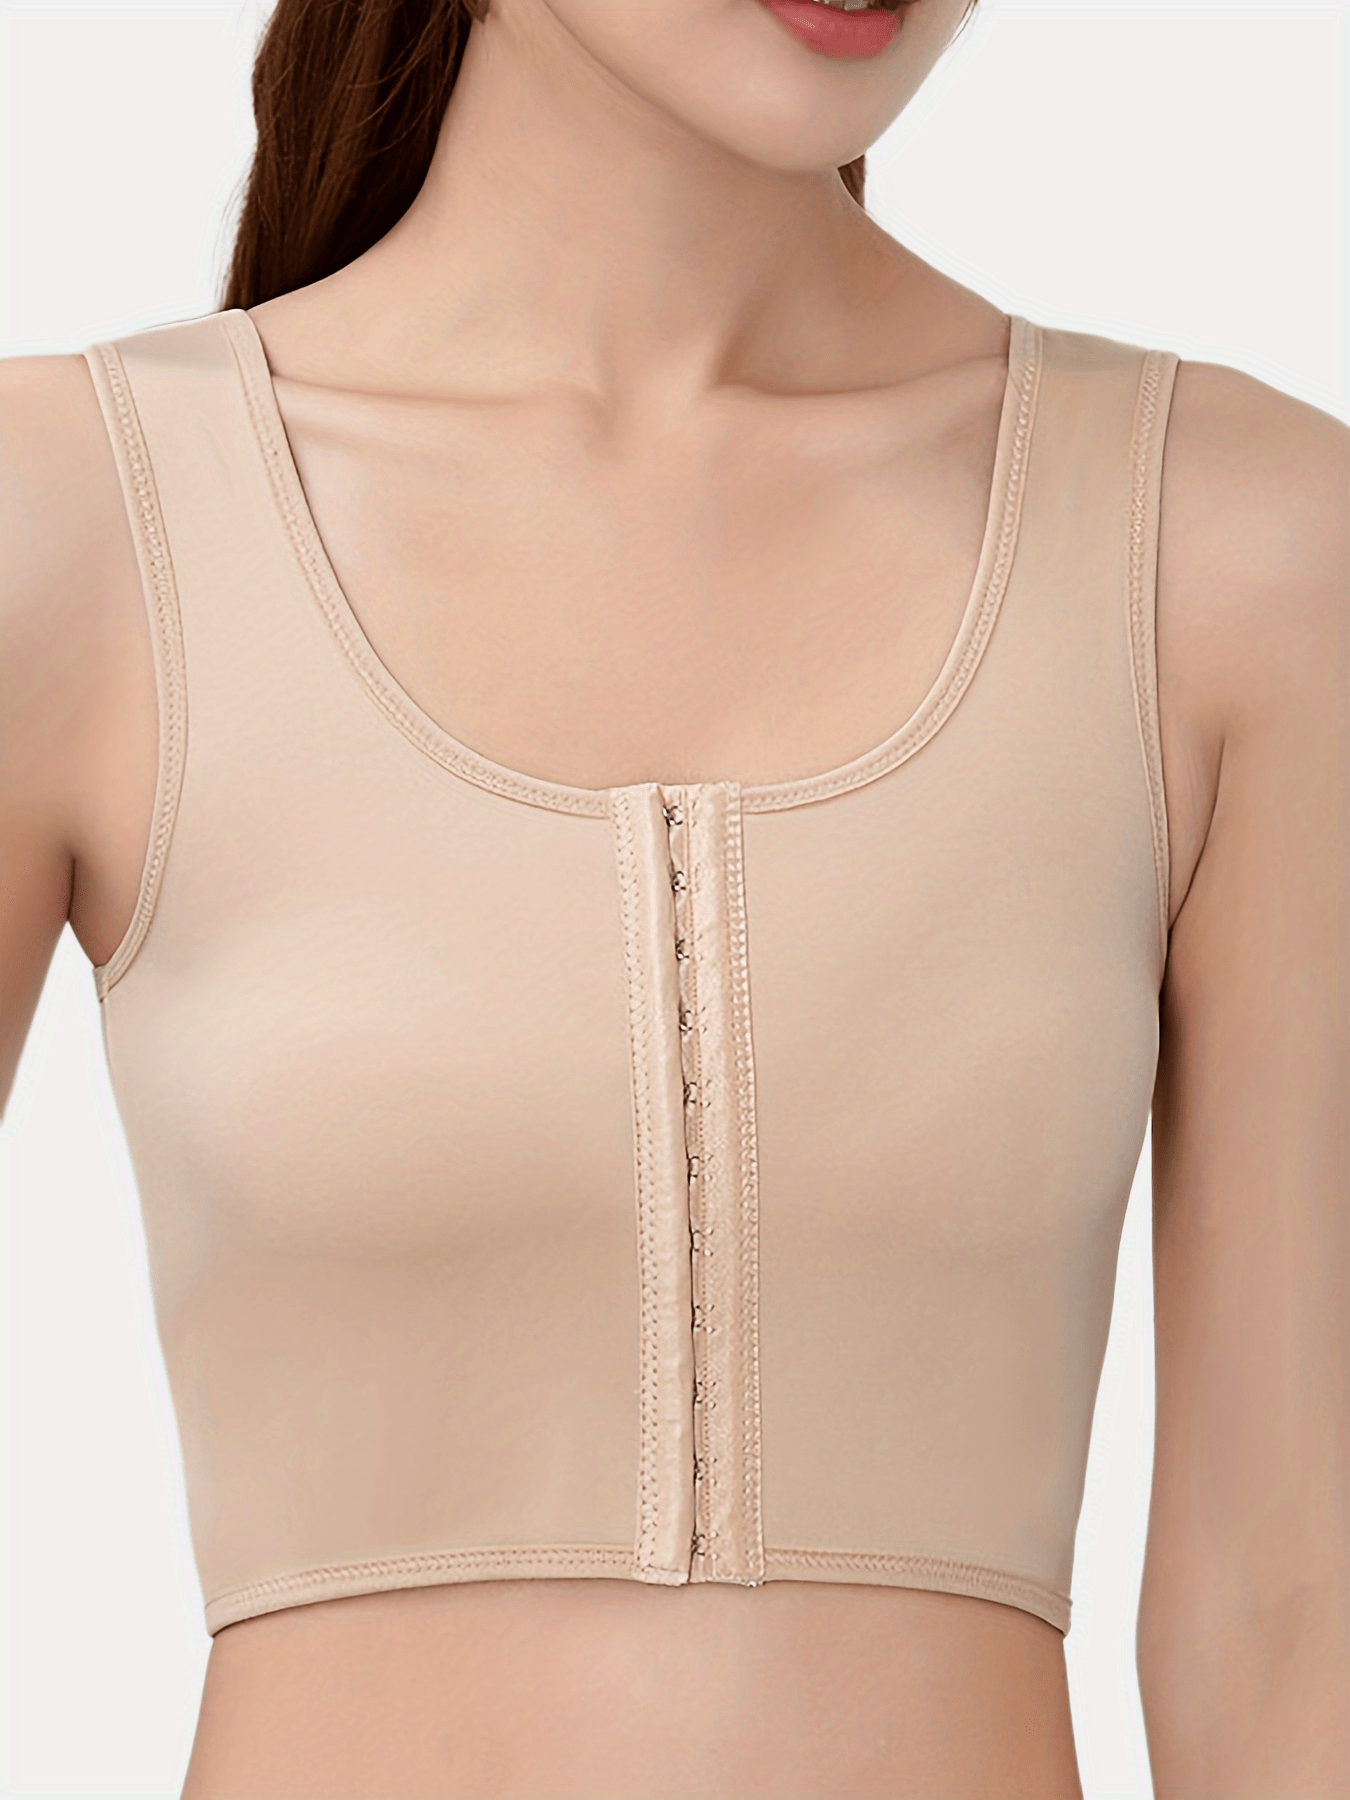  Long Full Length Sleeves Chest Brace Arm Shaper Tops Lift Up  Bra Women Support Vest Bras Breathable Corset Bra,Beige-Large : Clothing,  Shoes & Jewelry